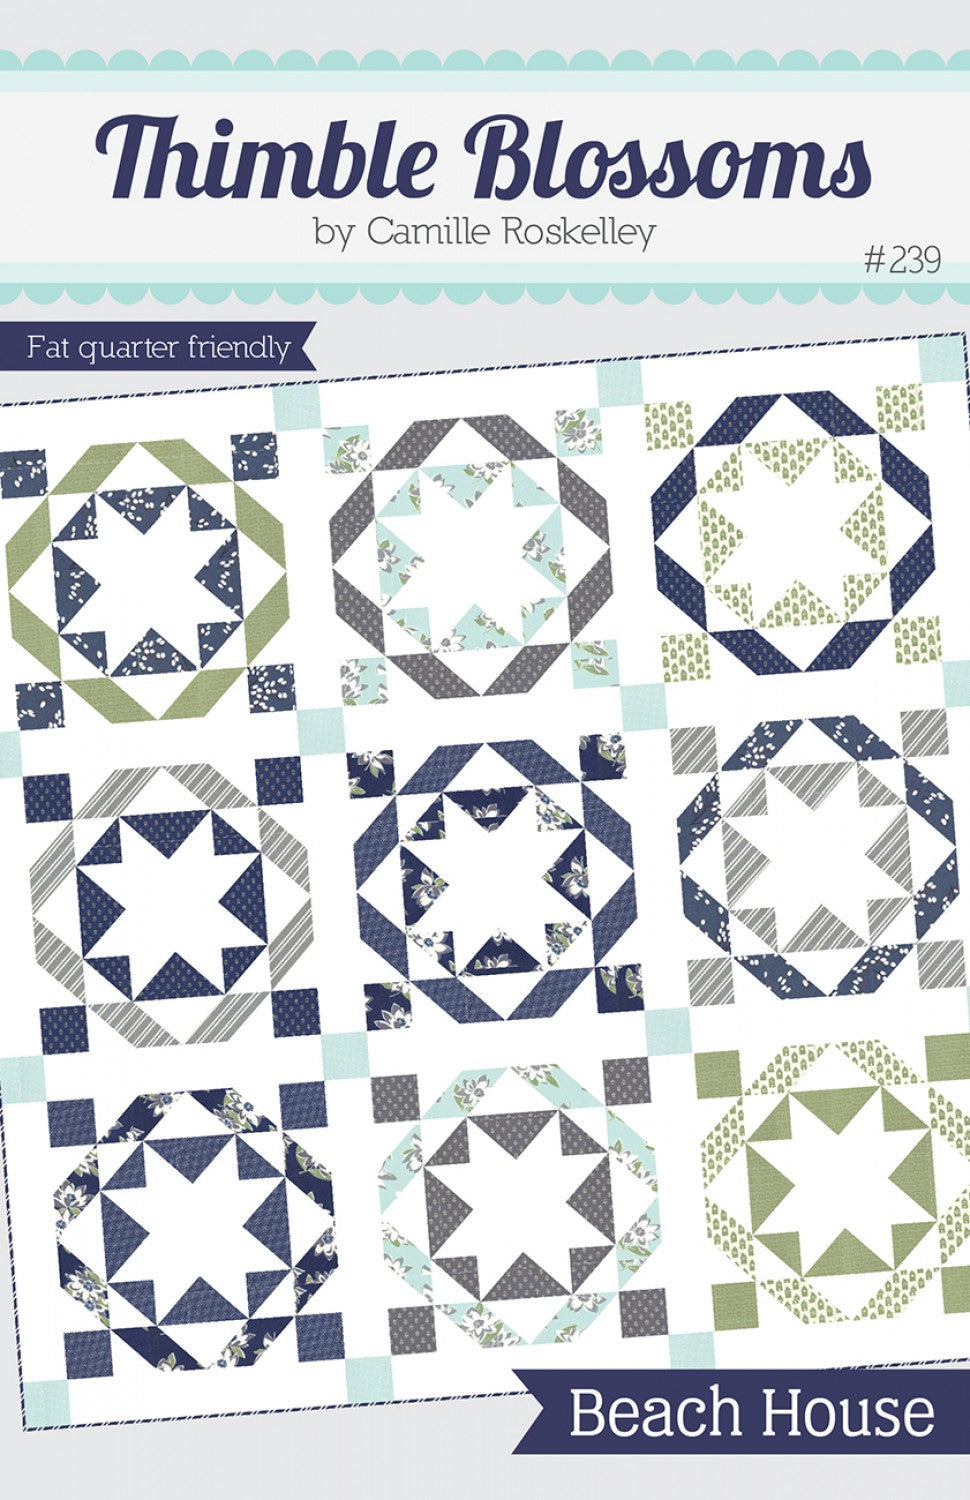 Beach House by Thimble Blossoms - PAPER Pattern